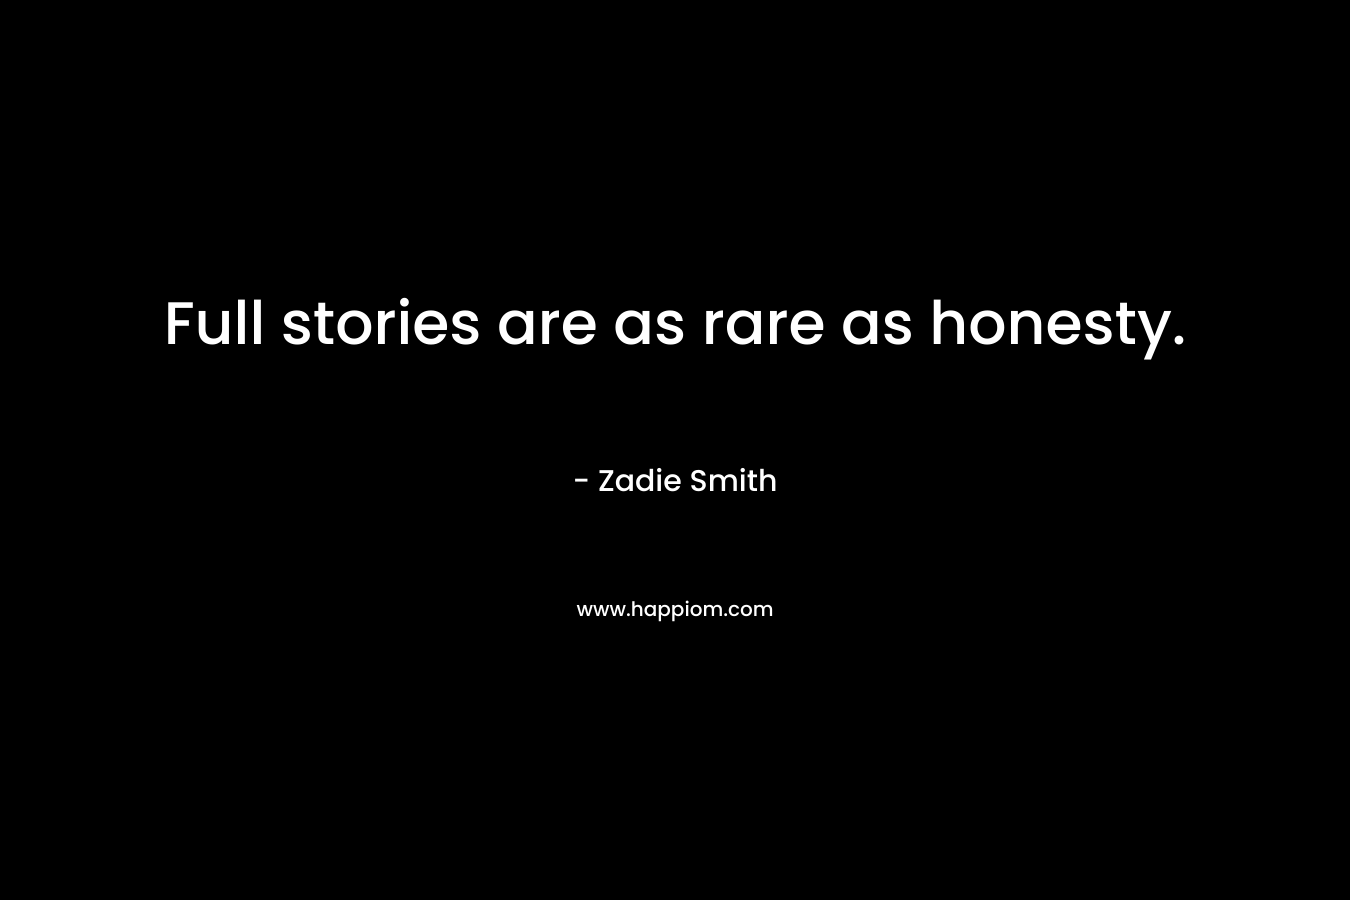 Full stories are as rare as honesty.